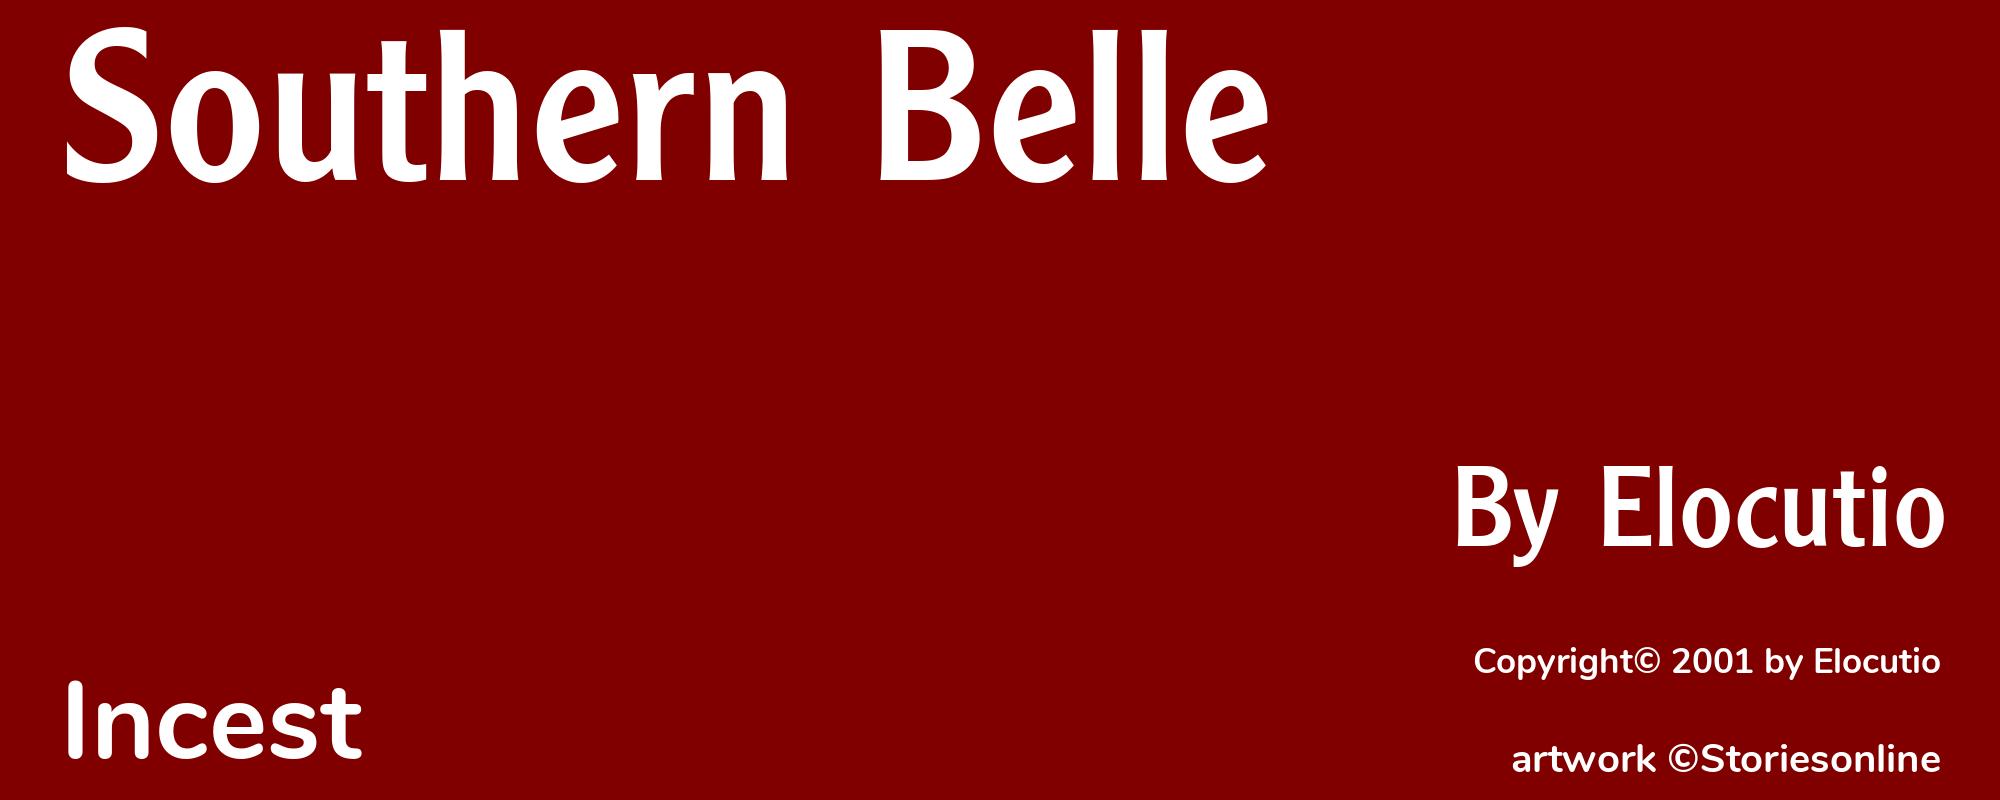 Southern Belle - Cover